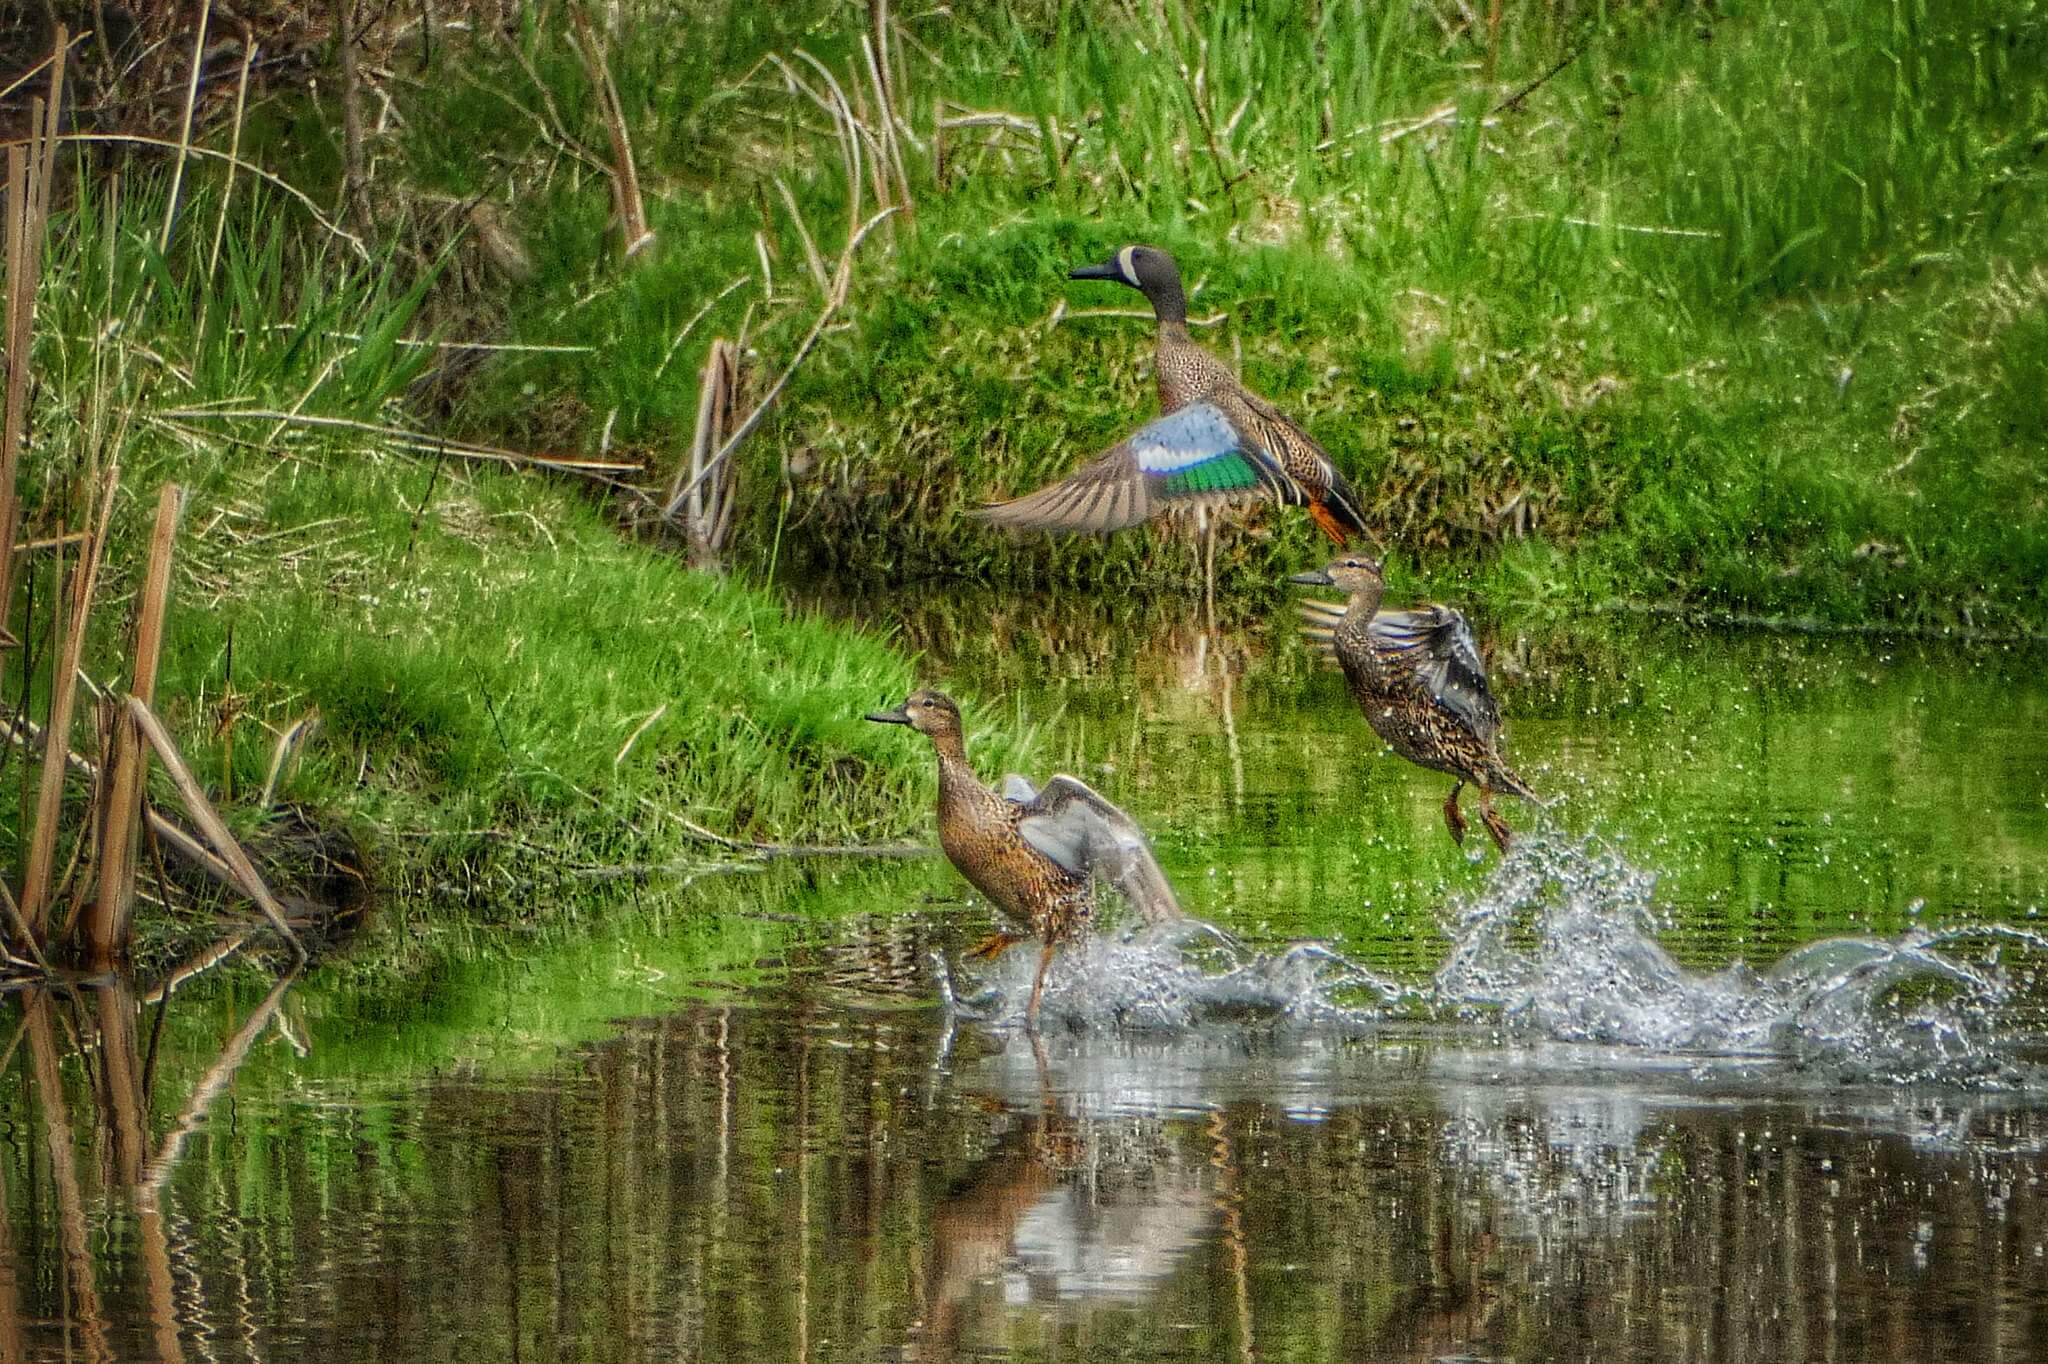 Three ducks taking flight from water next to a green sloping bank.